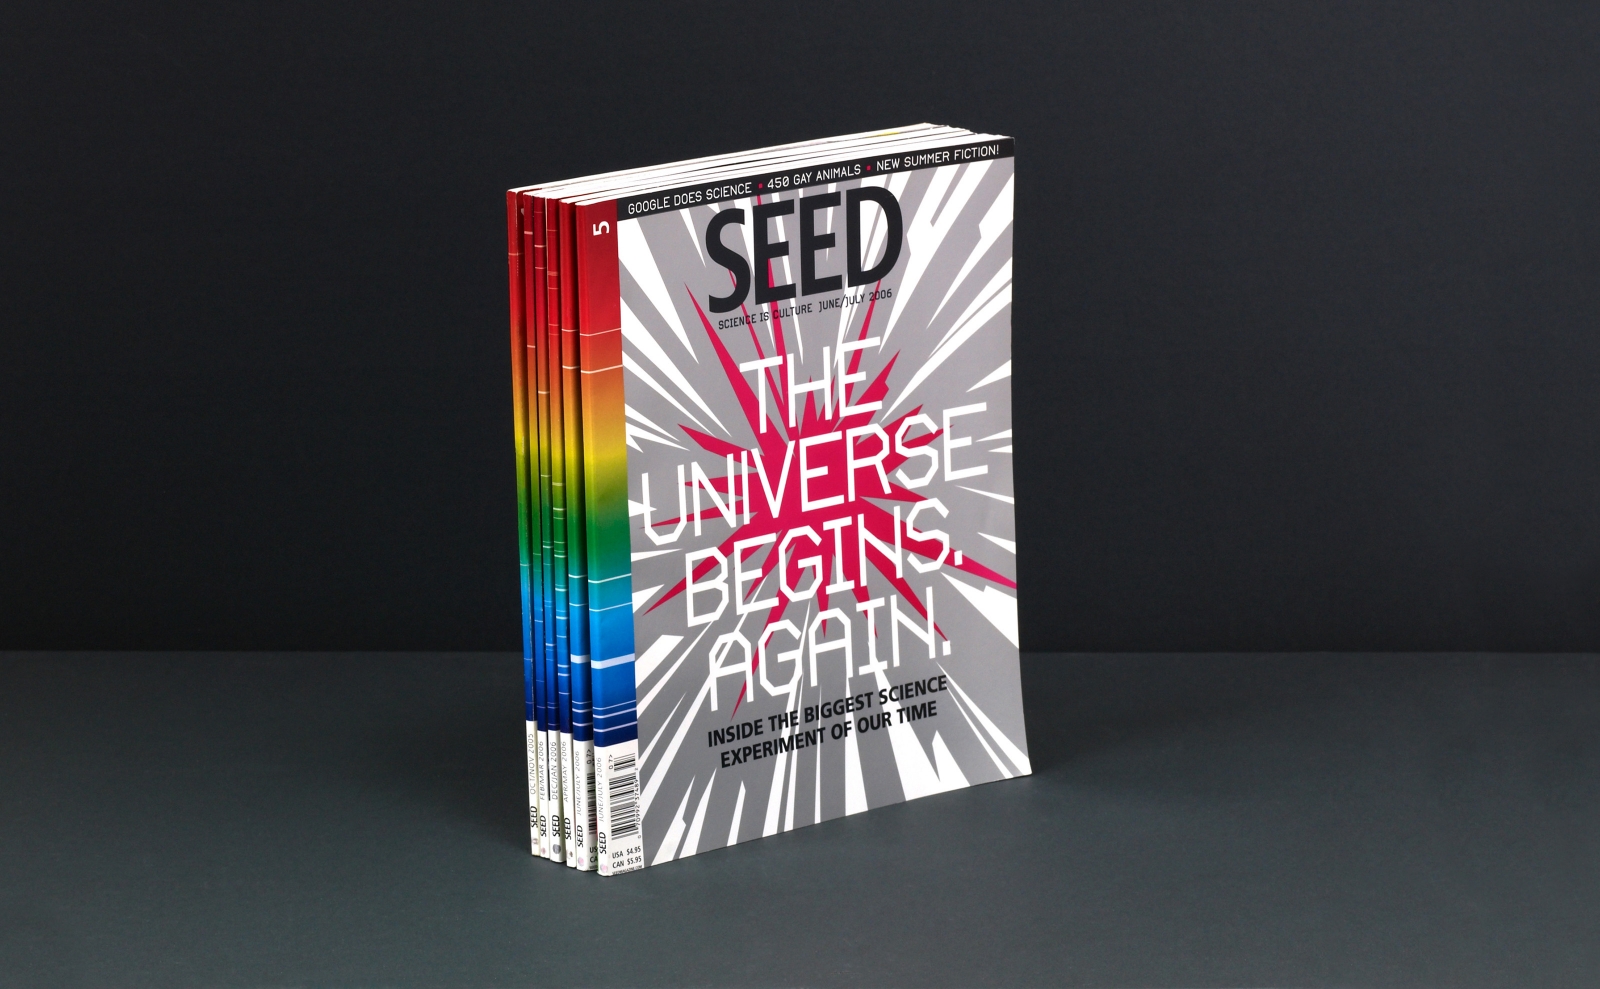 SEED magazine the universe begins again cover design